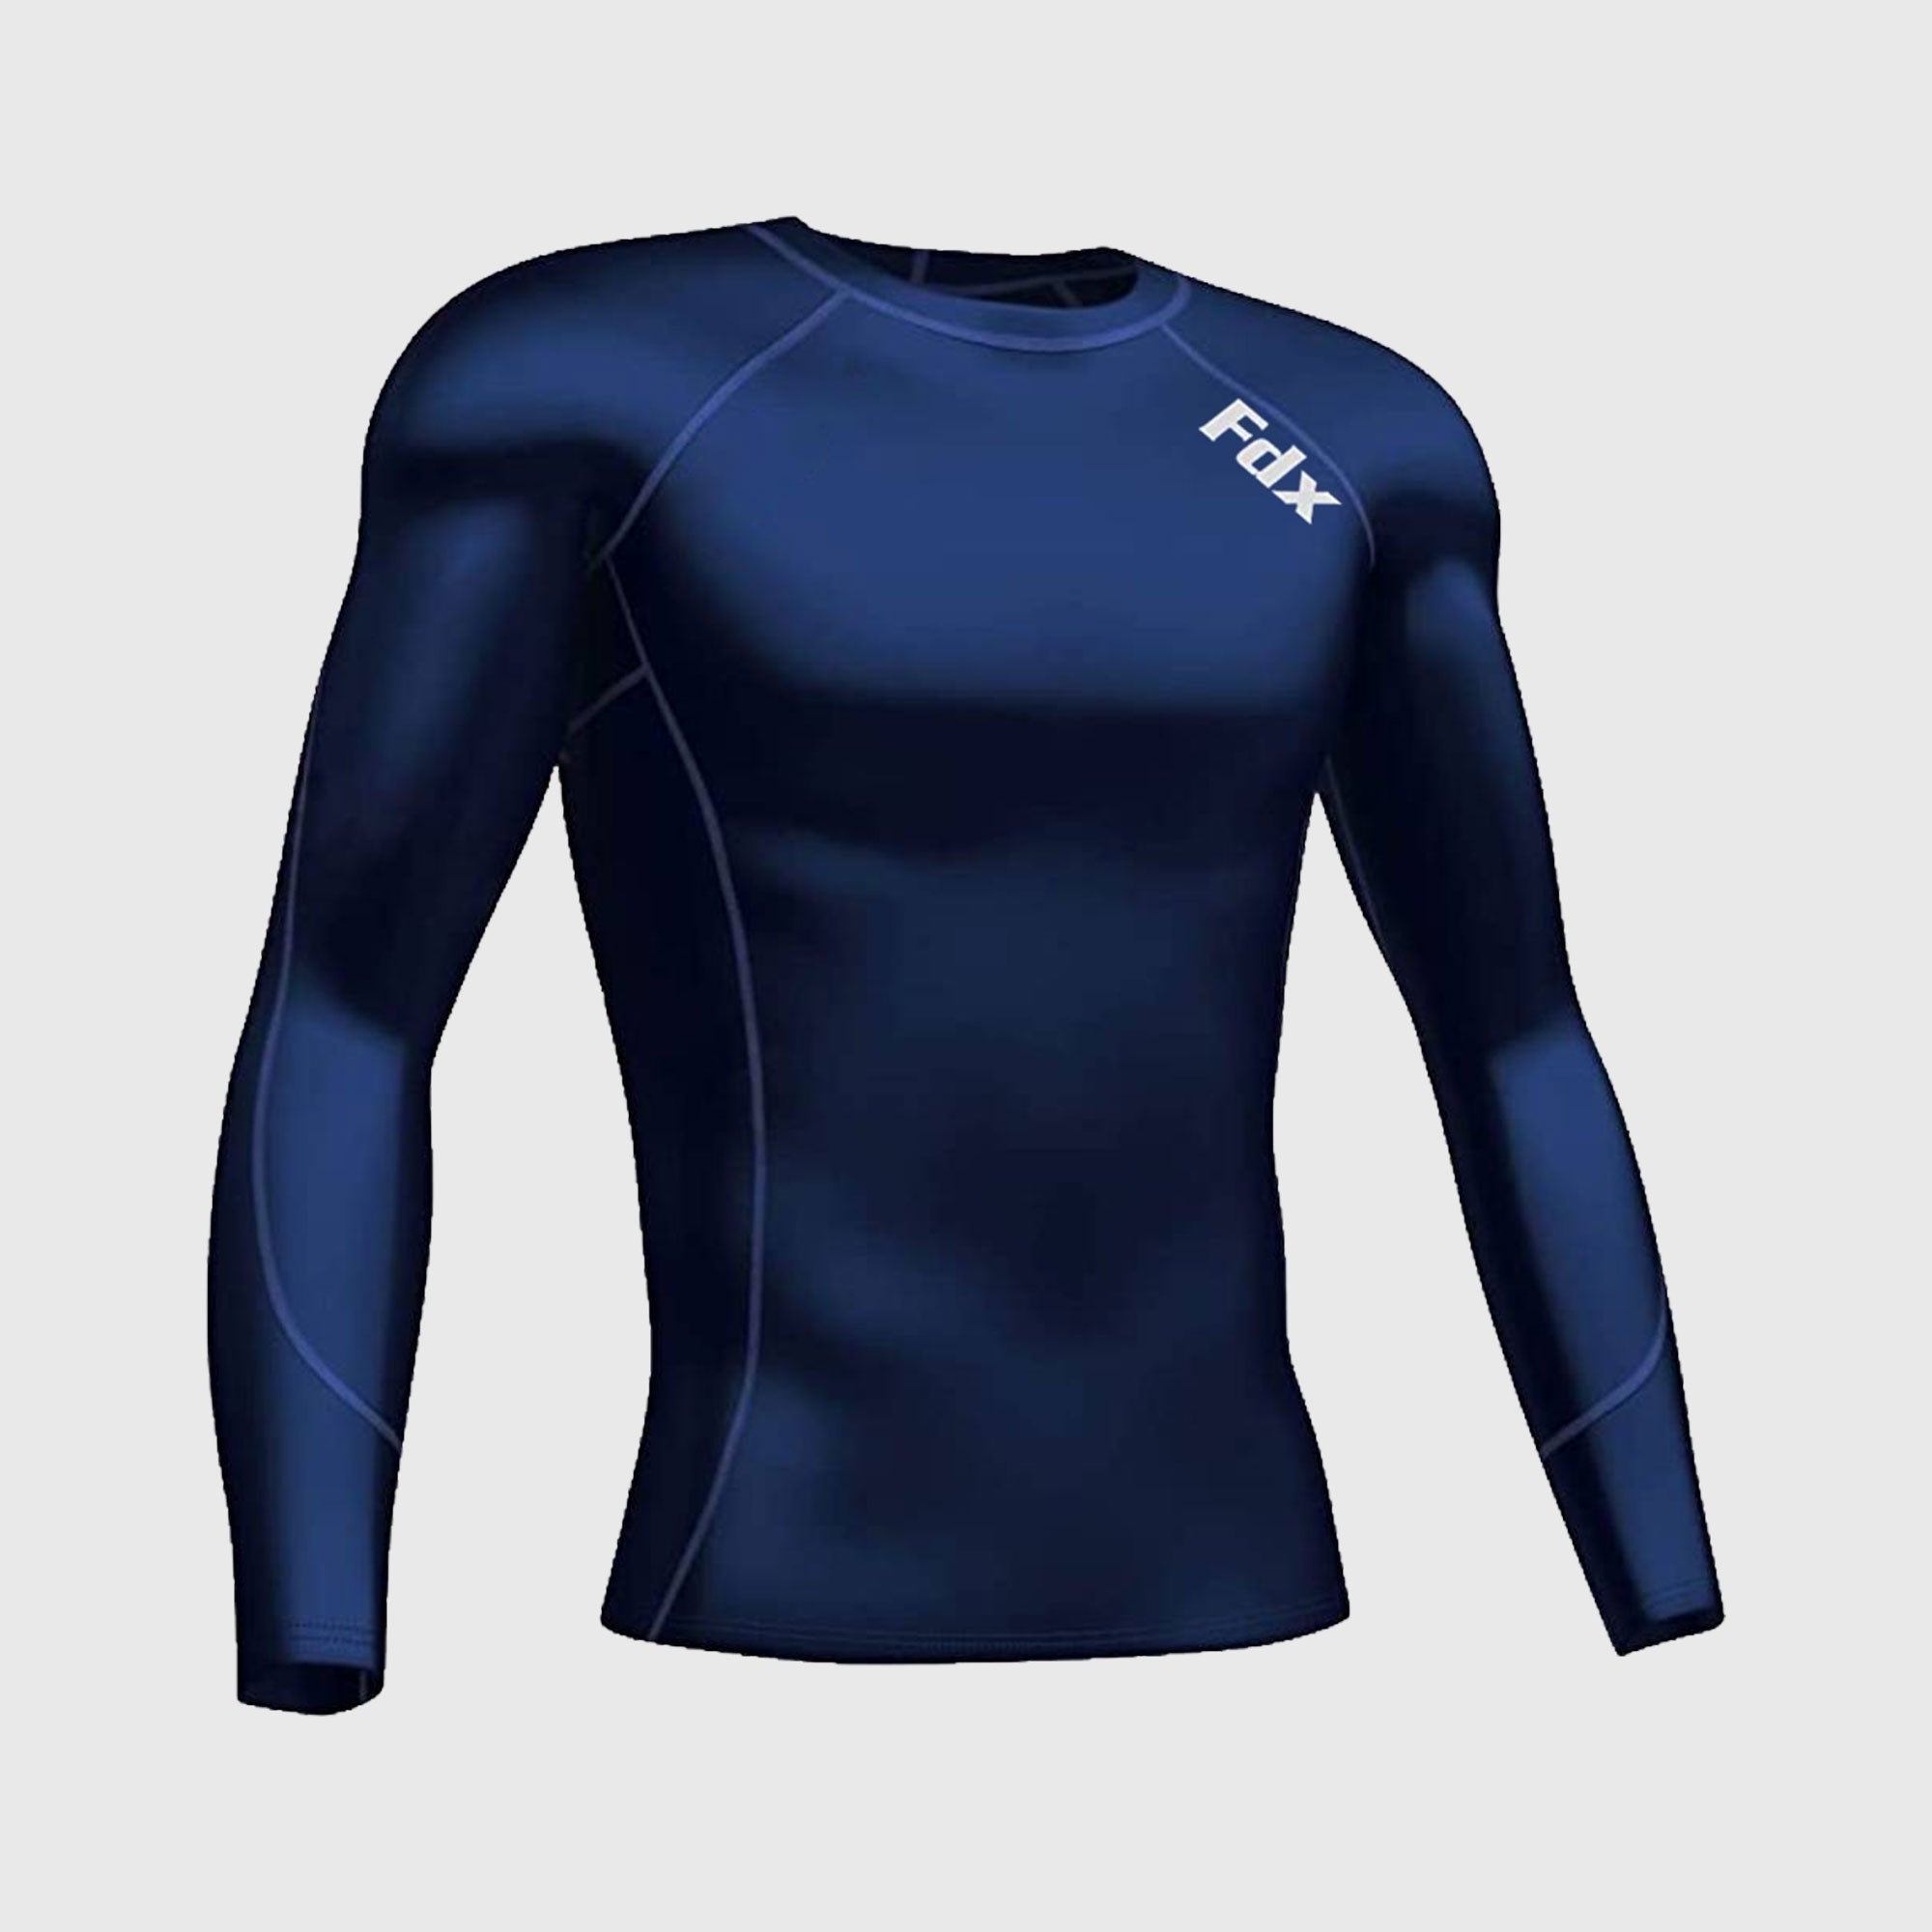 Fdx Thermolinx Navy Blue Men's Base Layer Winter Compression Top